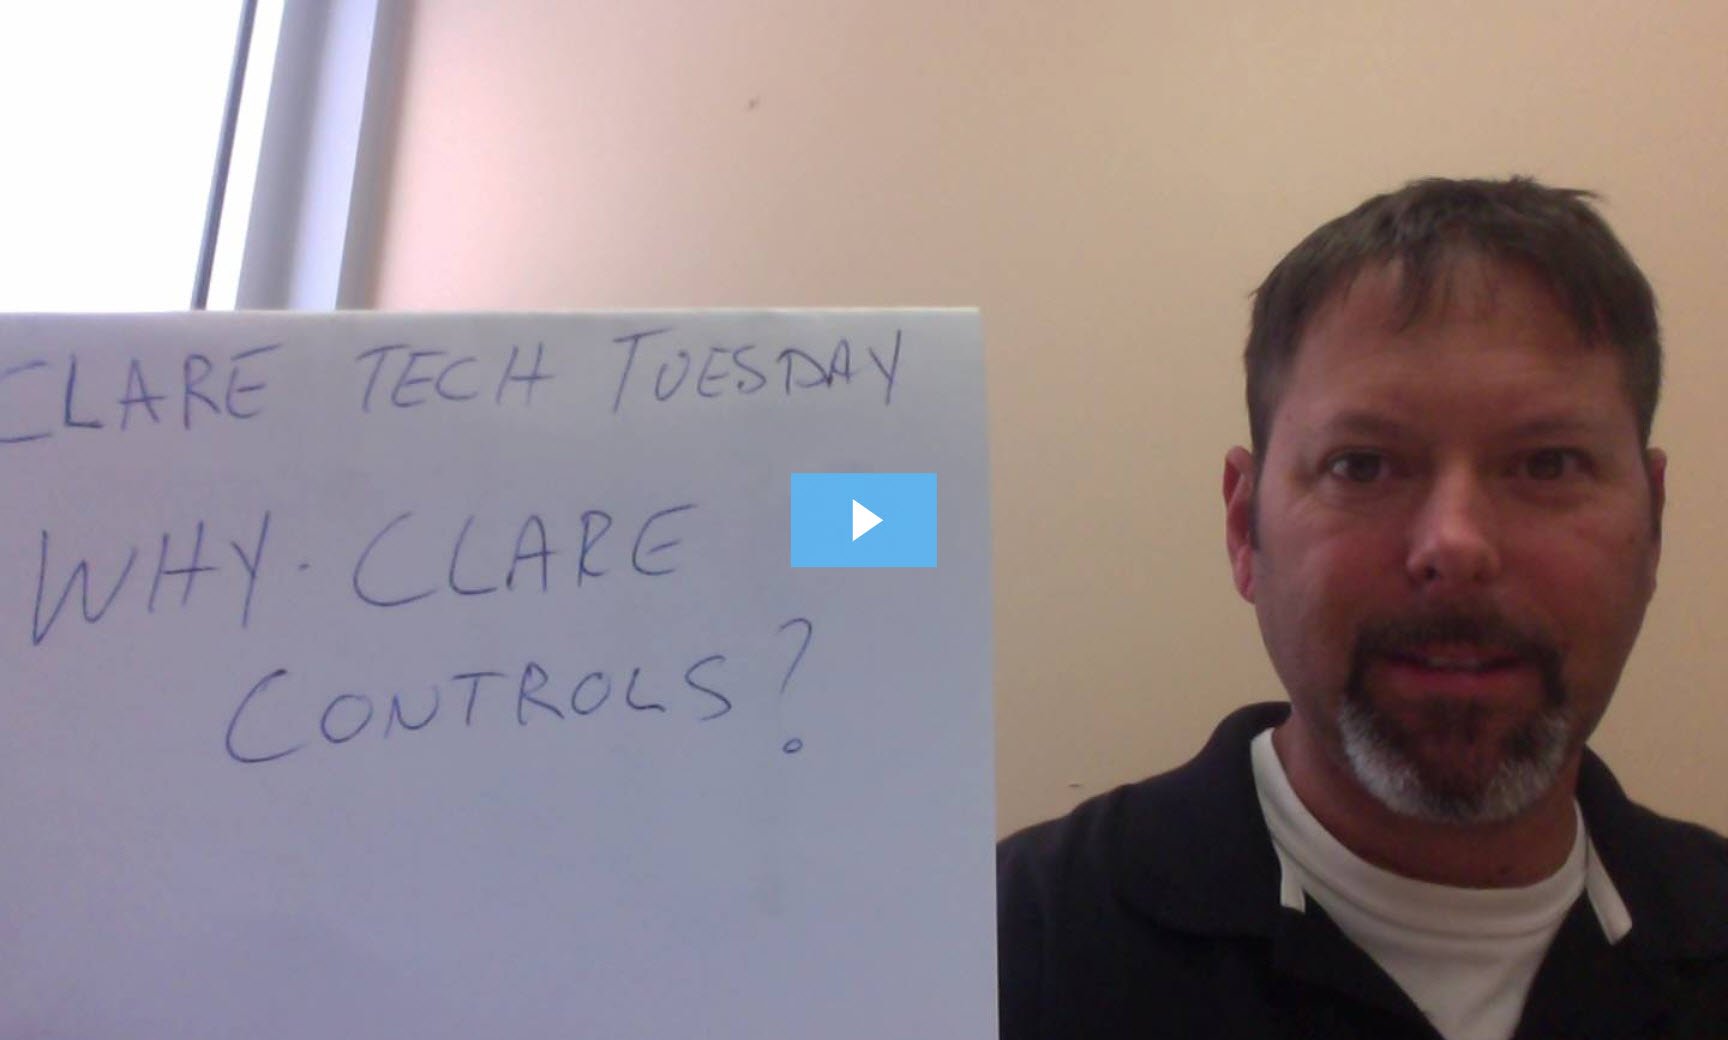 Clare Tech Tuesday: Why Clare?